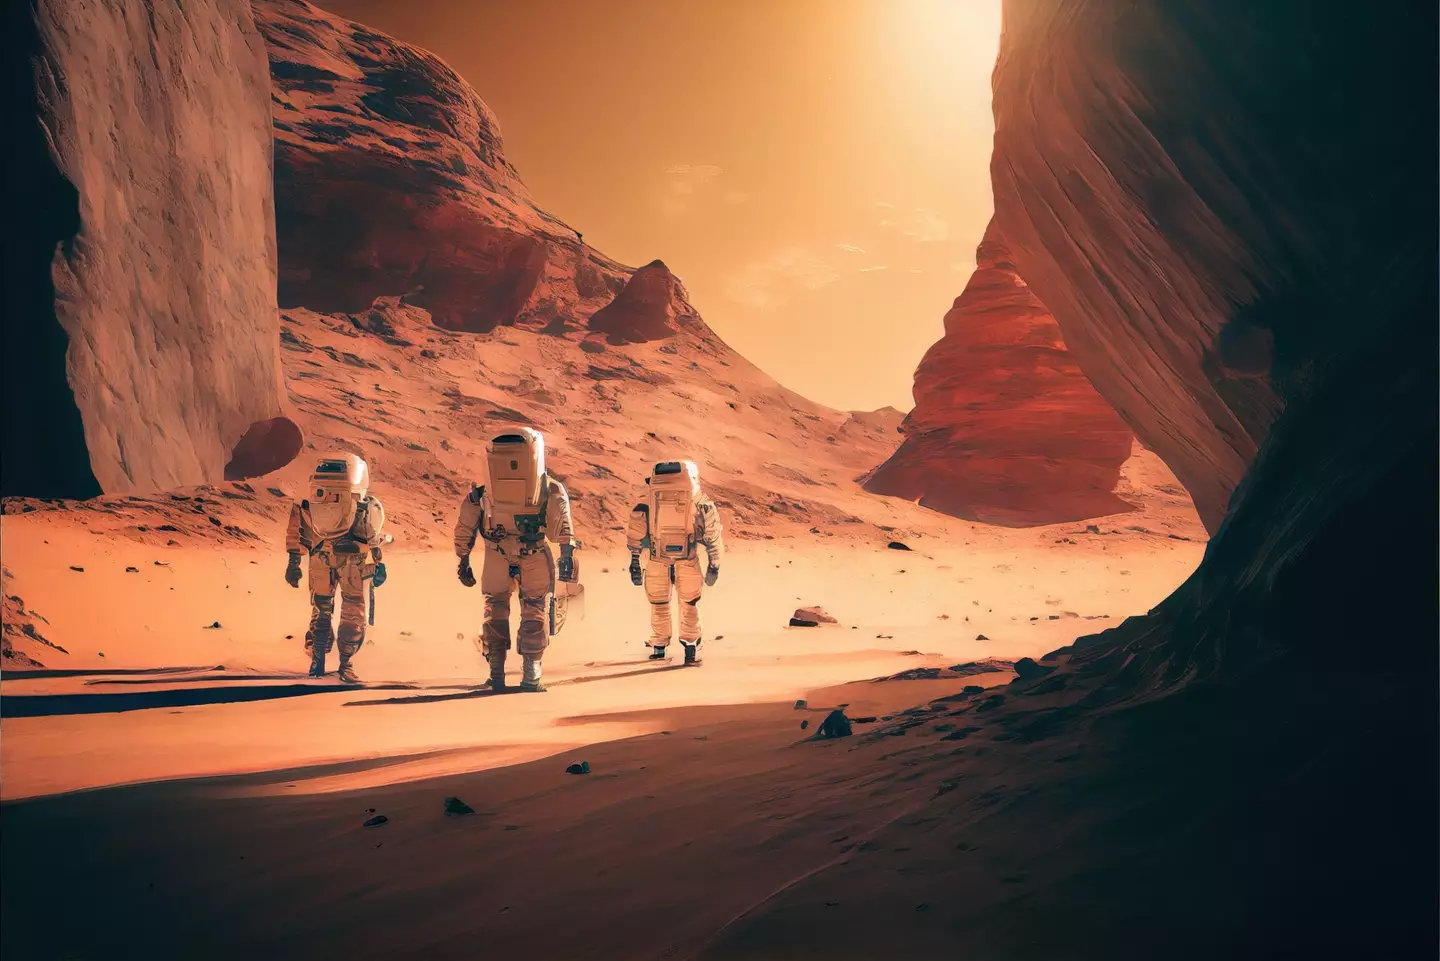 A study suggests women would be better suited for a mission to Mars.